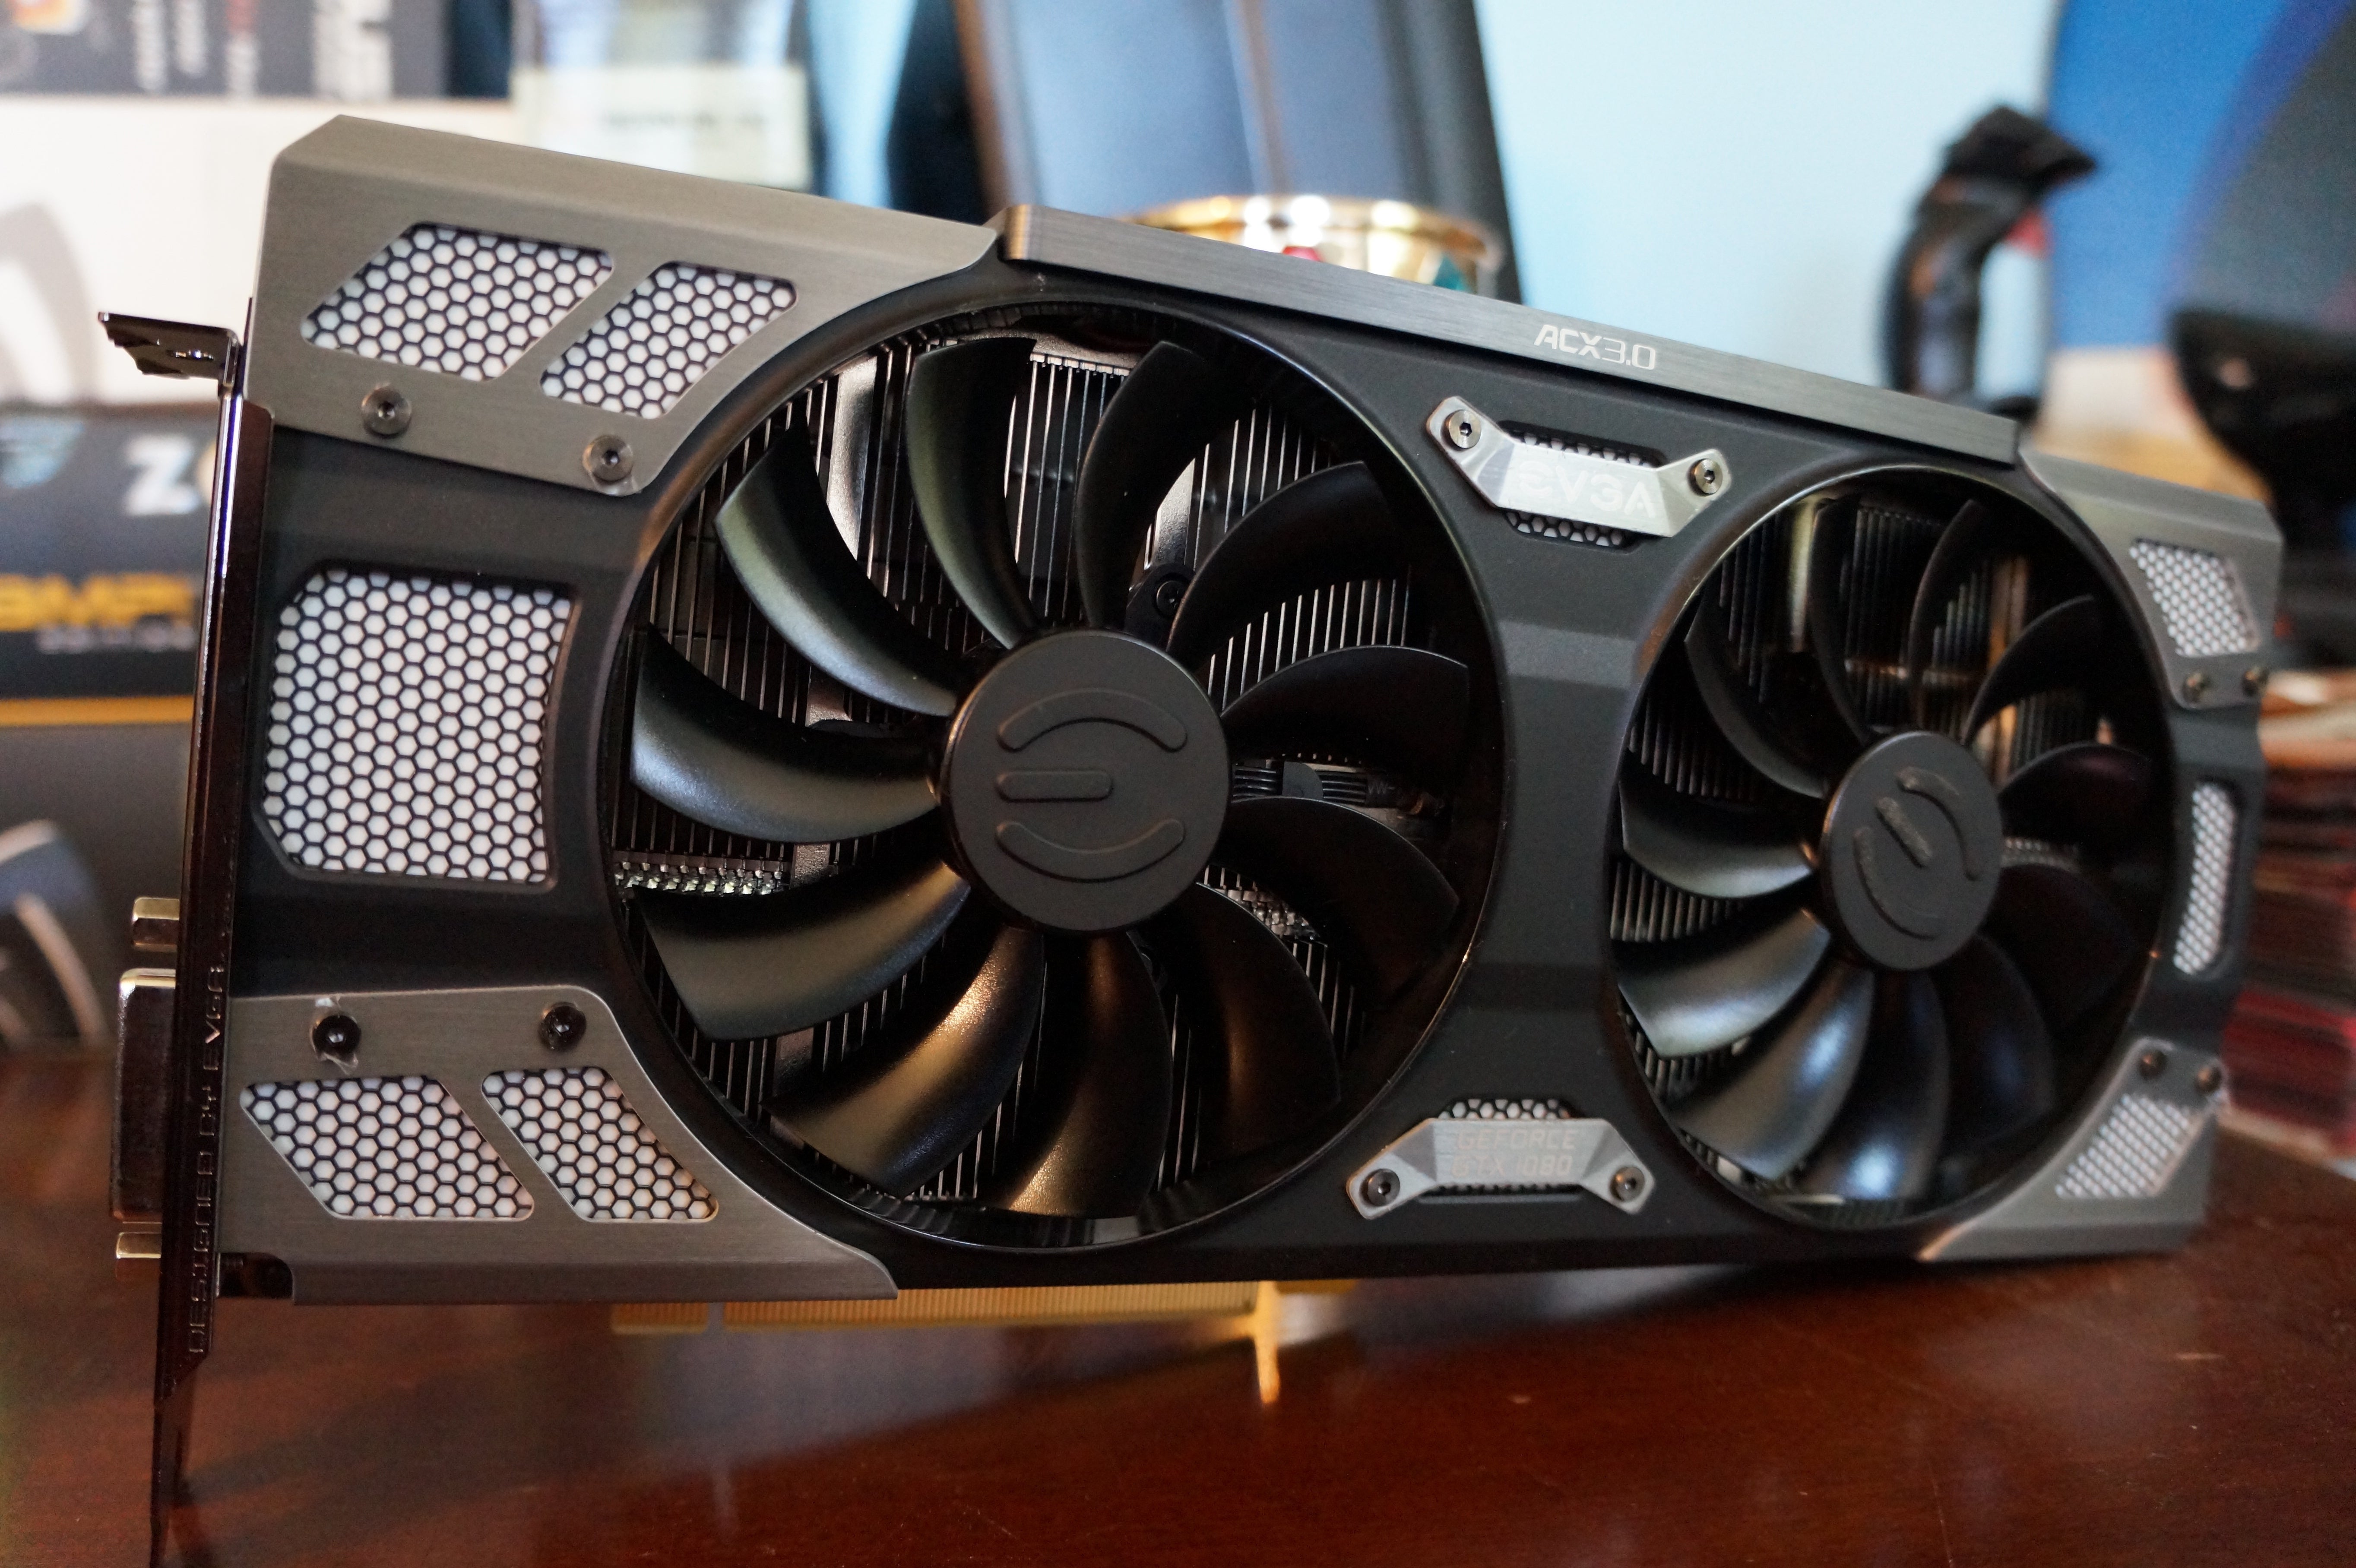 EVGA GTX 1080 FTW review: The most 